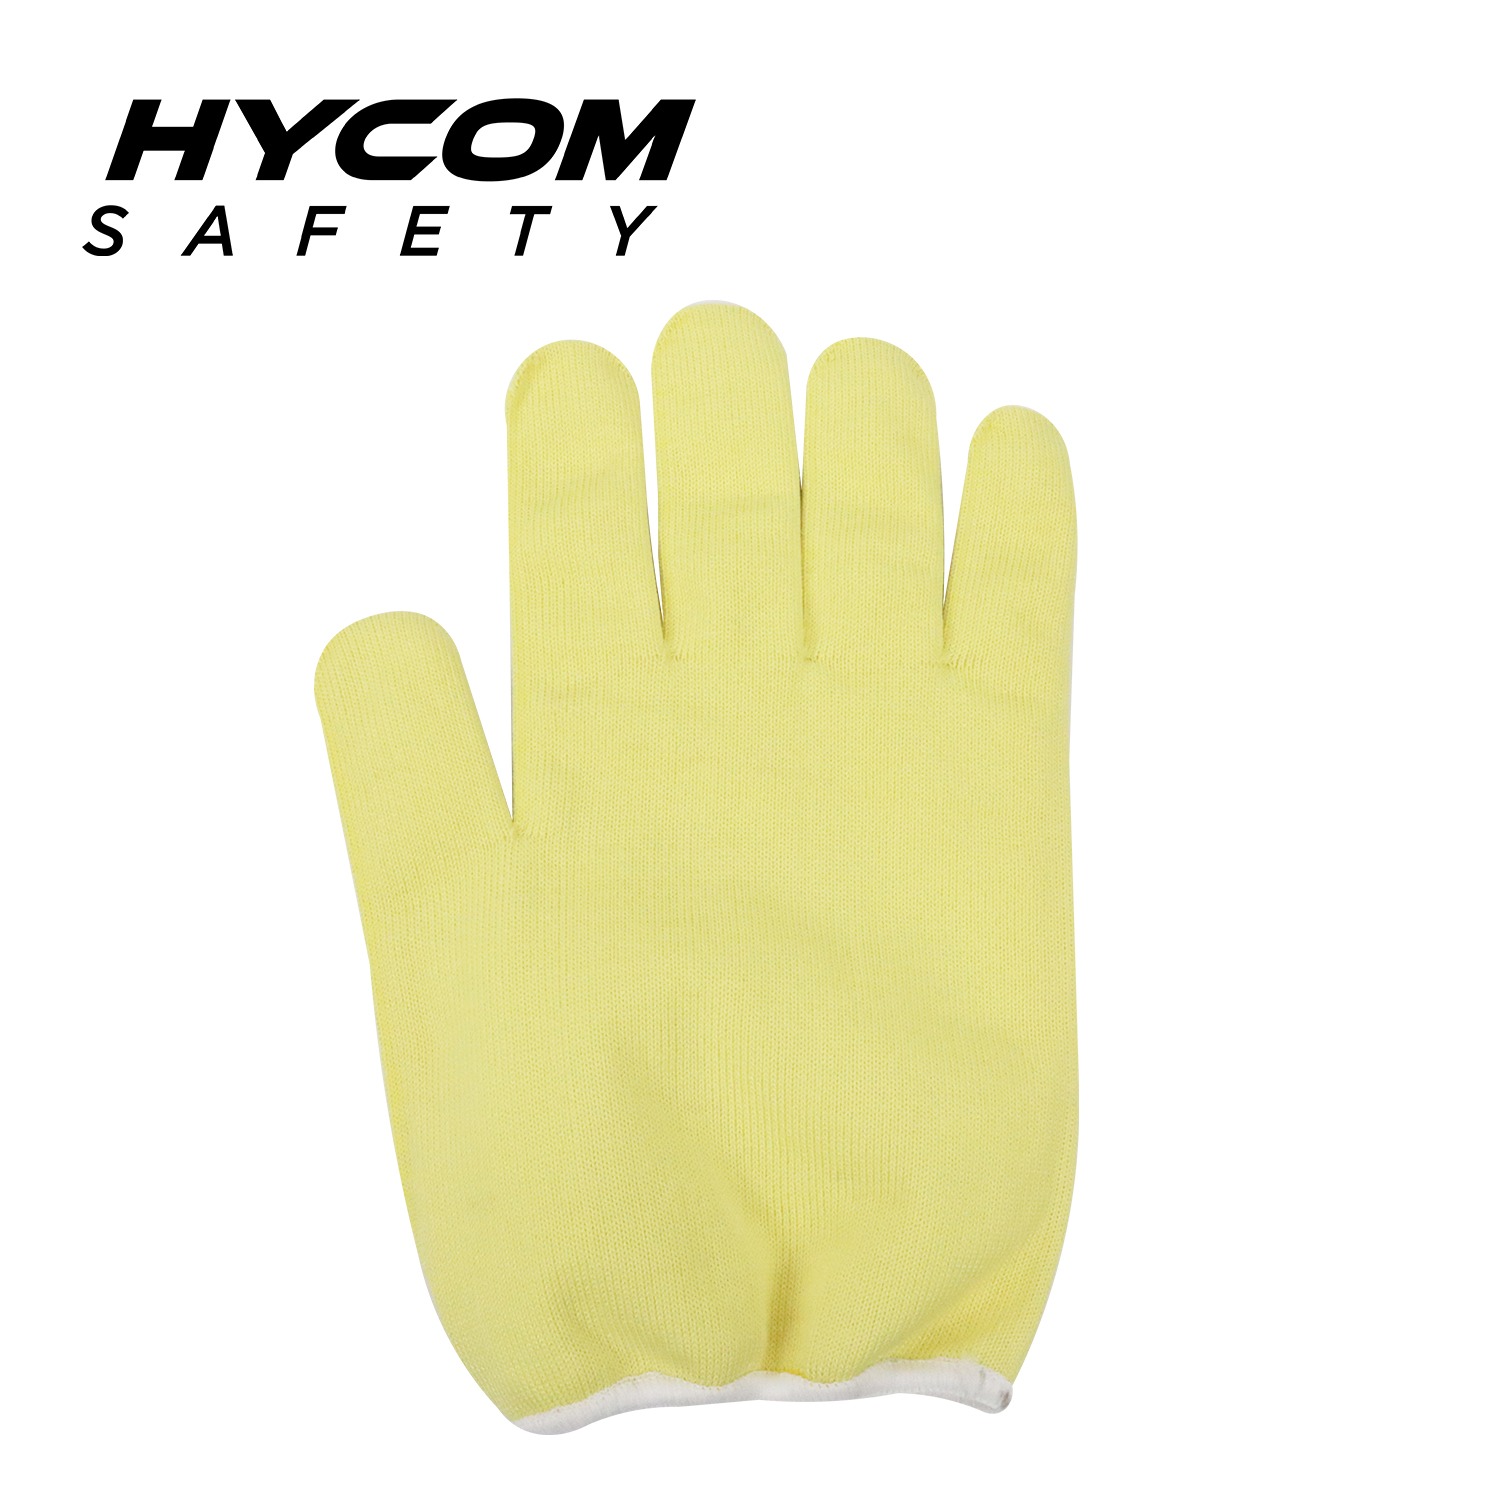 HYCOM 10G ANSI 2 aramid cut resistant glove dust free with contact high temperature 350°C/650F EN407